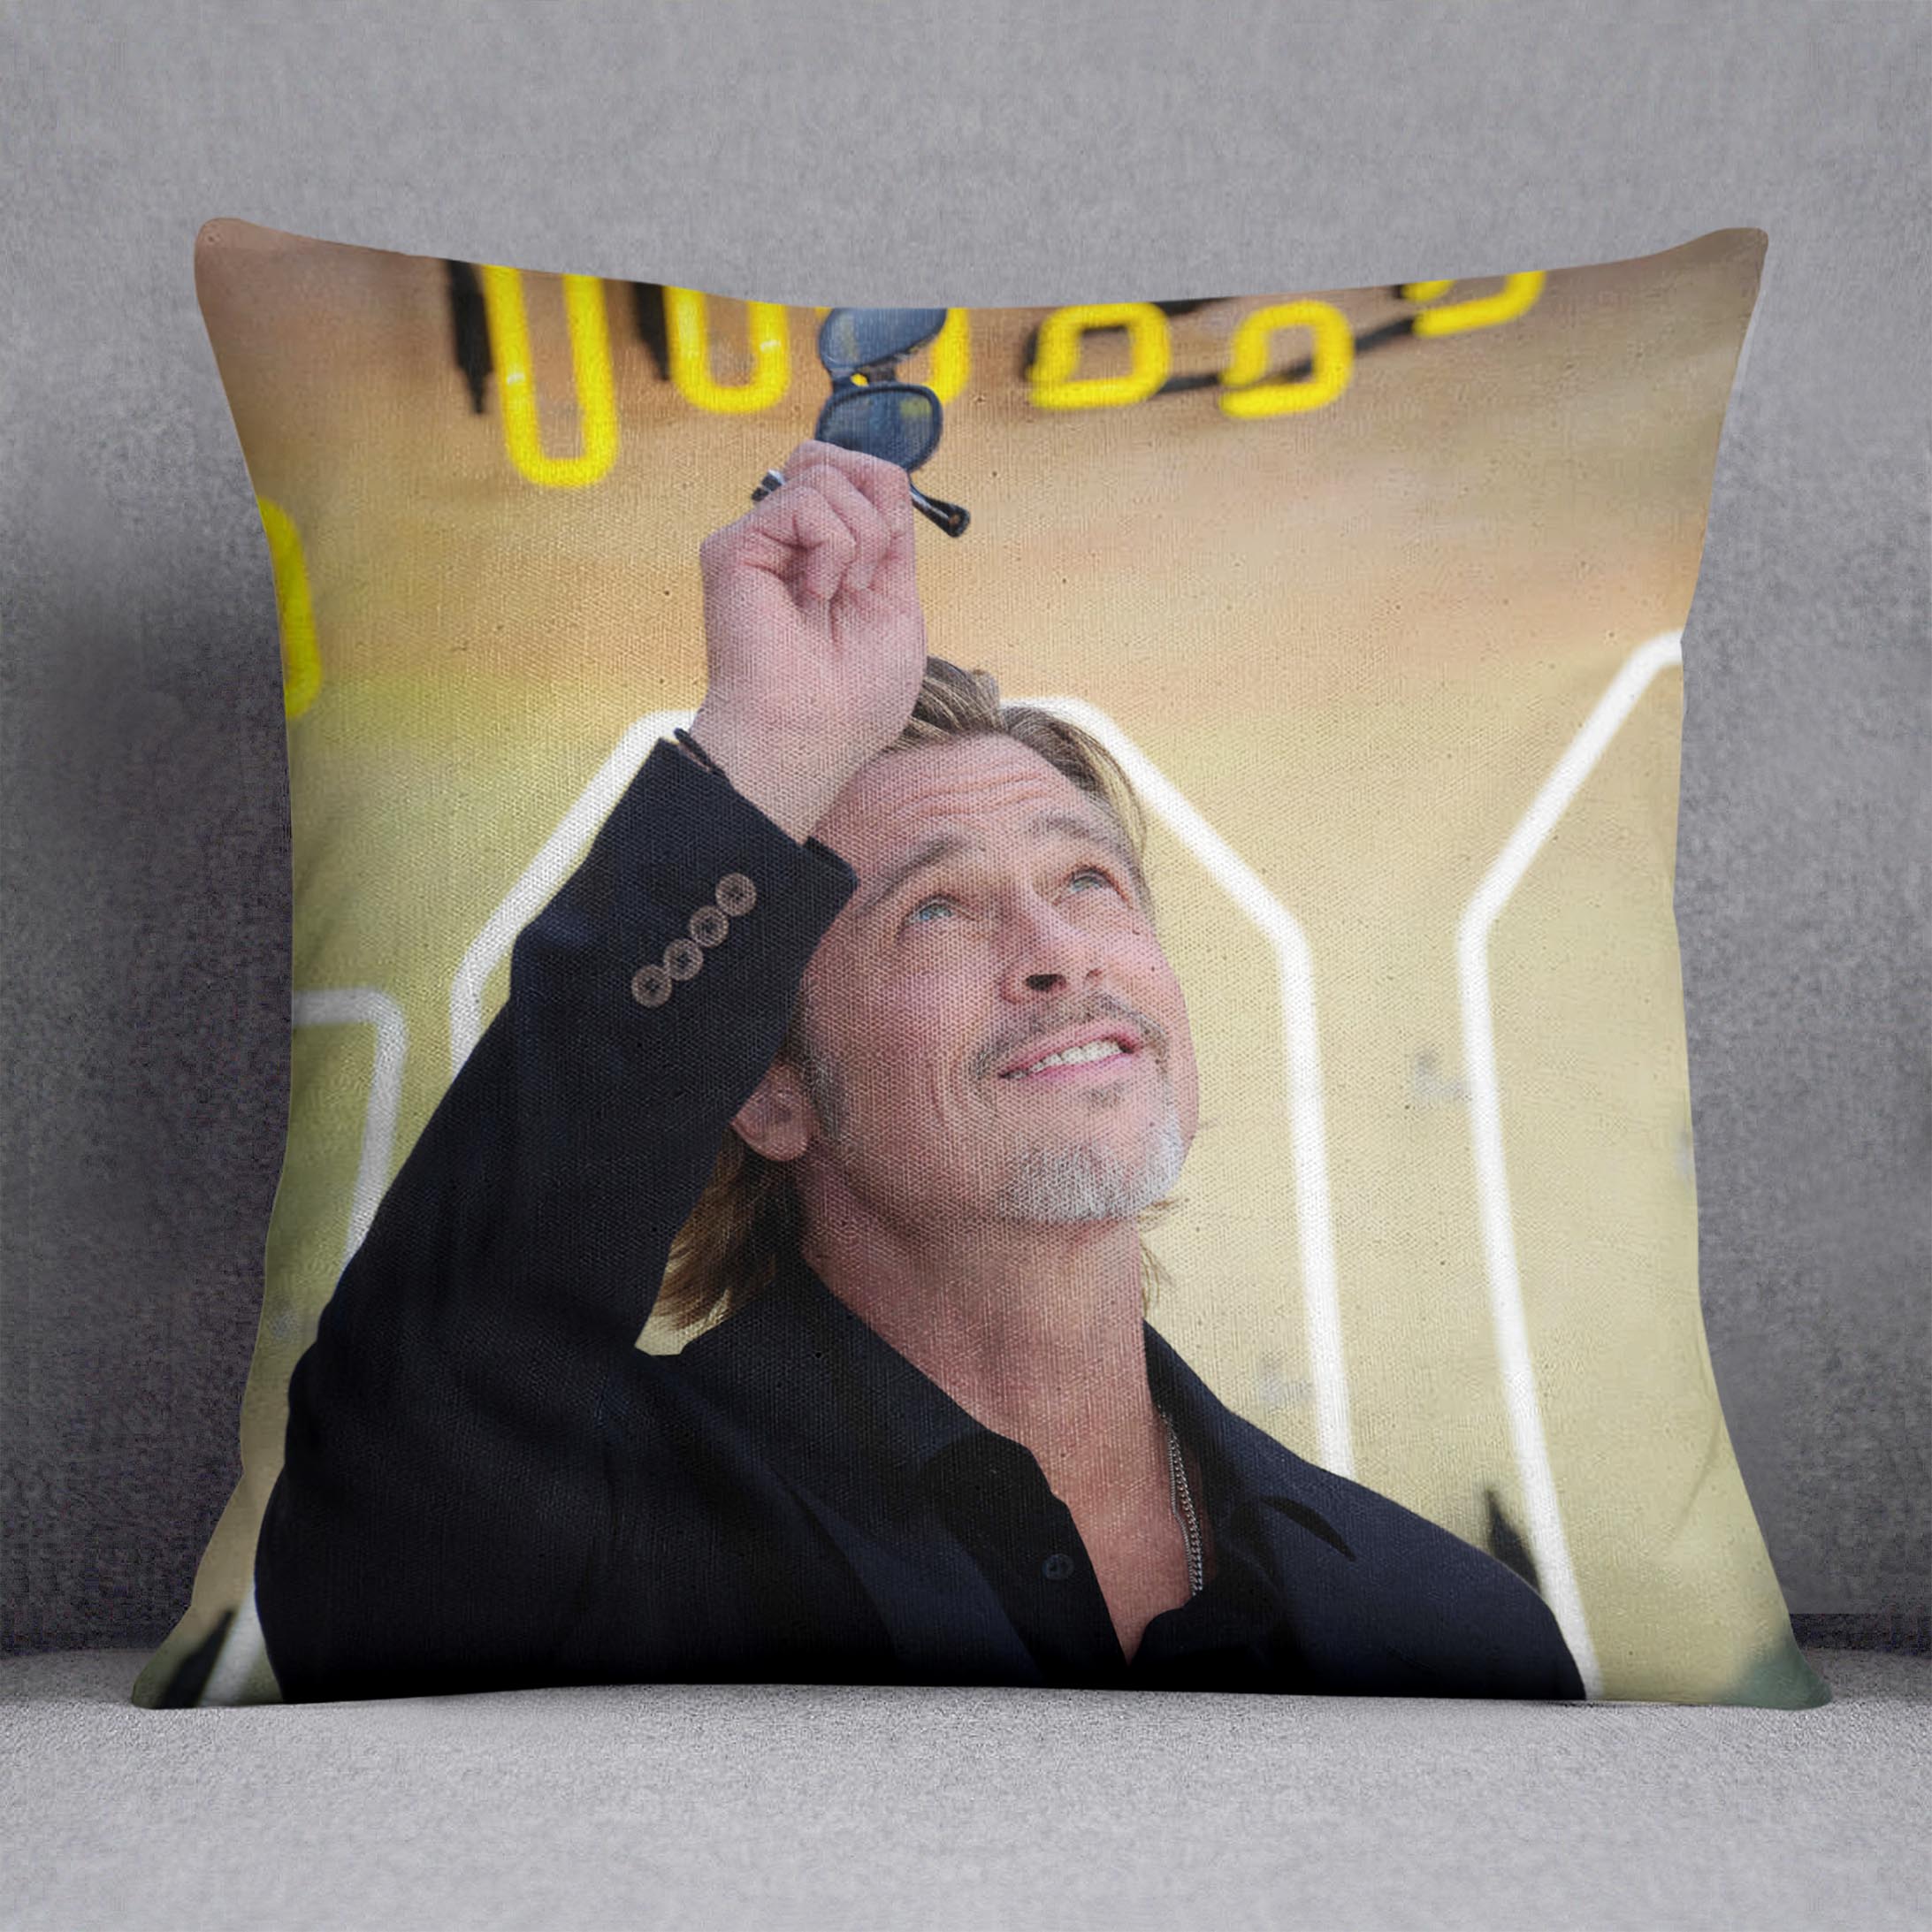 Brad Pitt Once Upon A Time In Hollywood Premiere UK Cushion - Canvas Art Rocks - 1